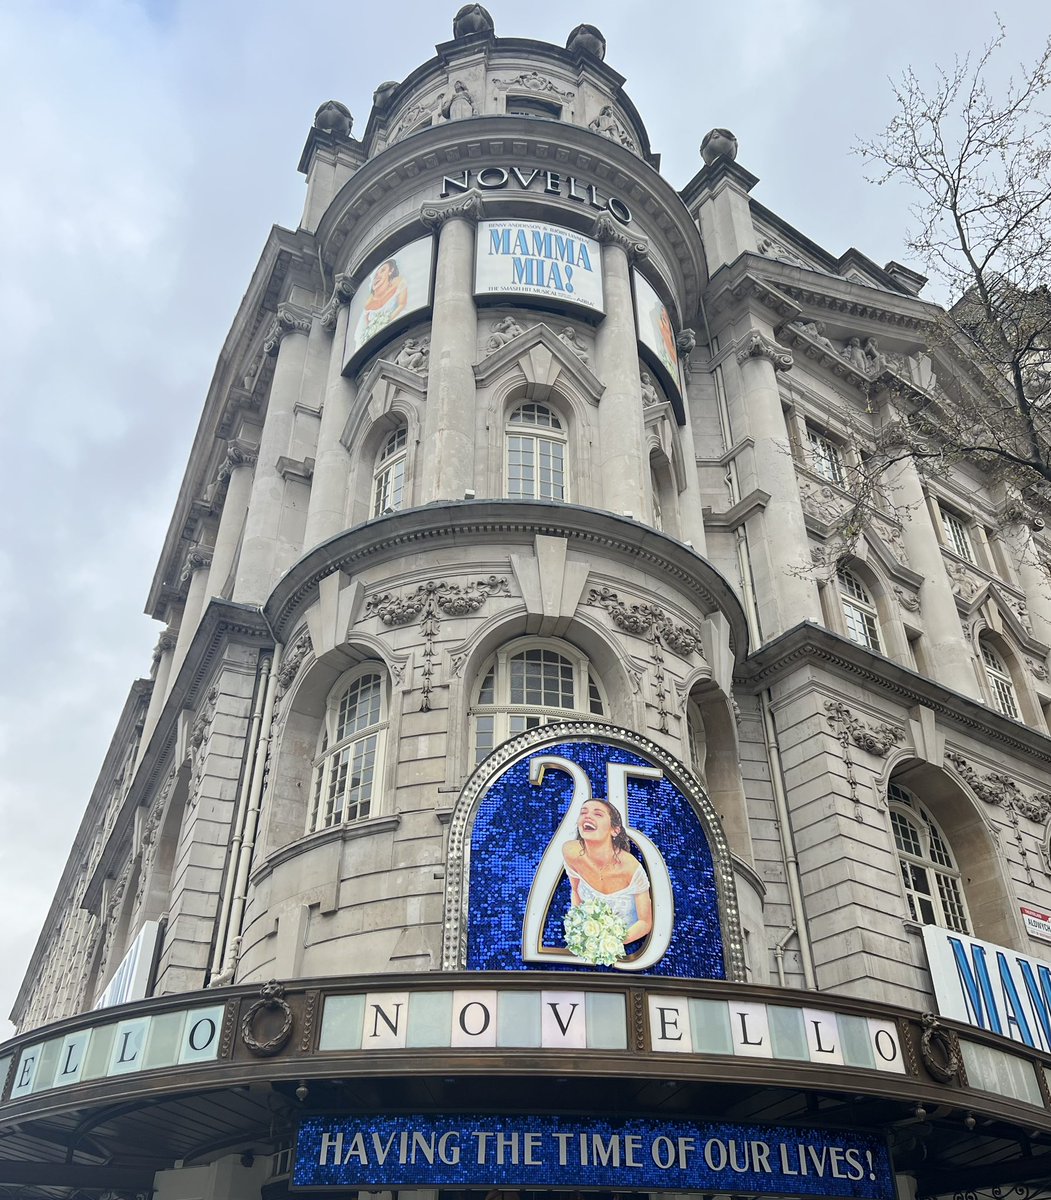 Definite #THEATRE buzz while walking around the Capital early this am - there’s a sense of excitement back in the West End that I’ve not felt for a while - @sixthemusical @hadestown @TheSavoyLondon @BTTFmusical @TinaTheMusical @MindMangler @MammaMiaMusical @BookofMormon